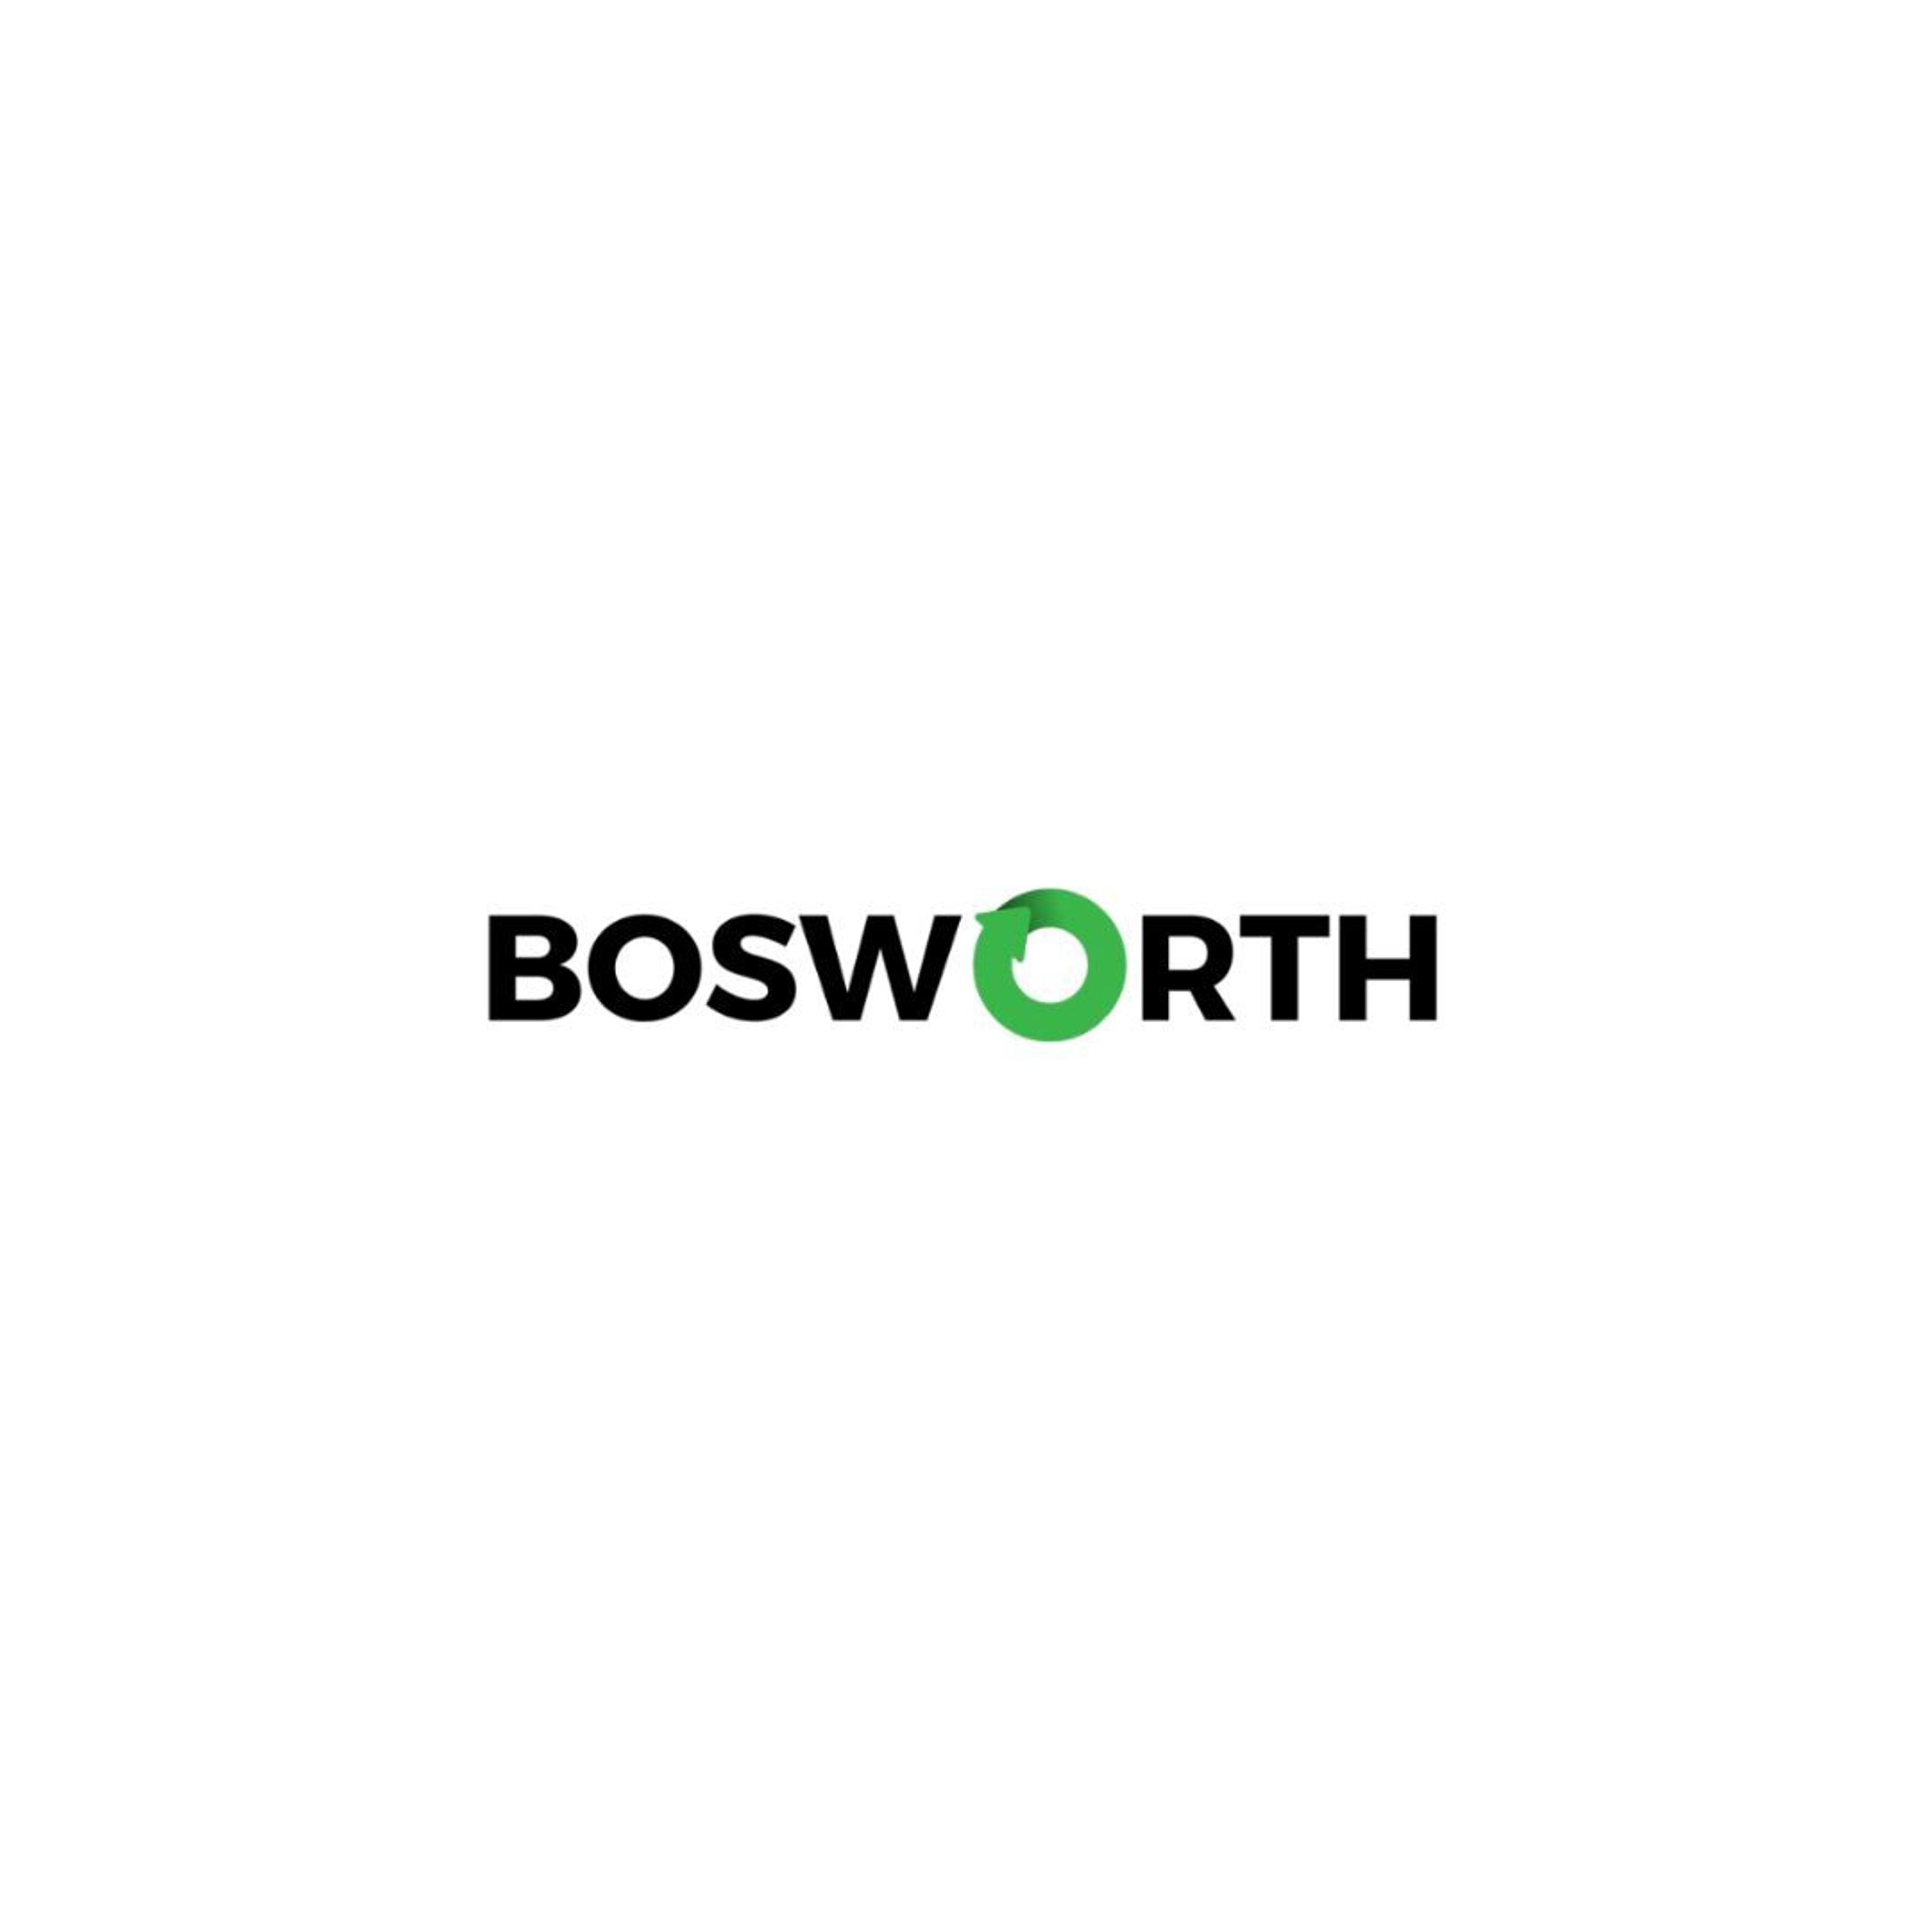 Recent project we worked on for Bosworth Group - Drainage Website Design